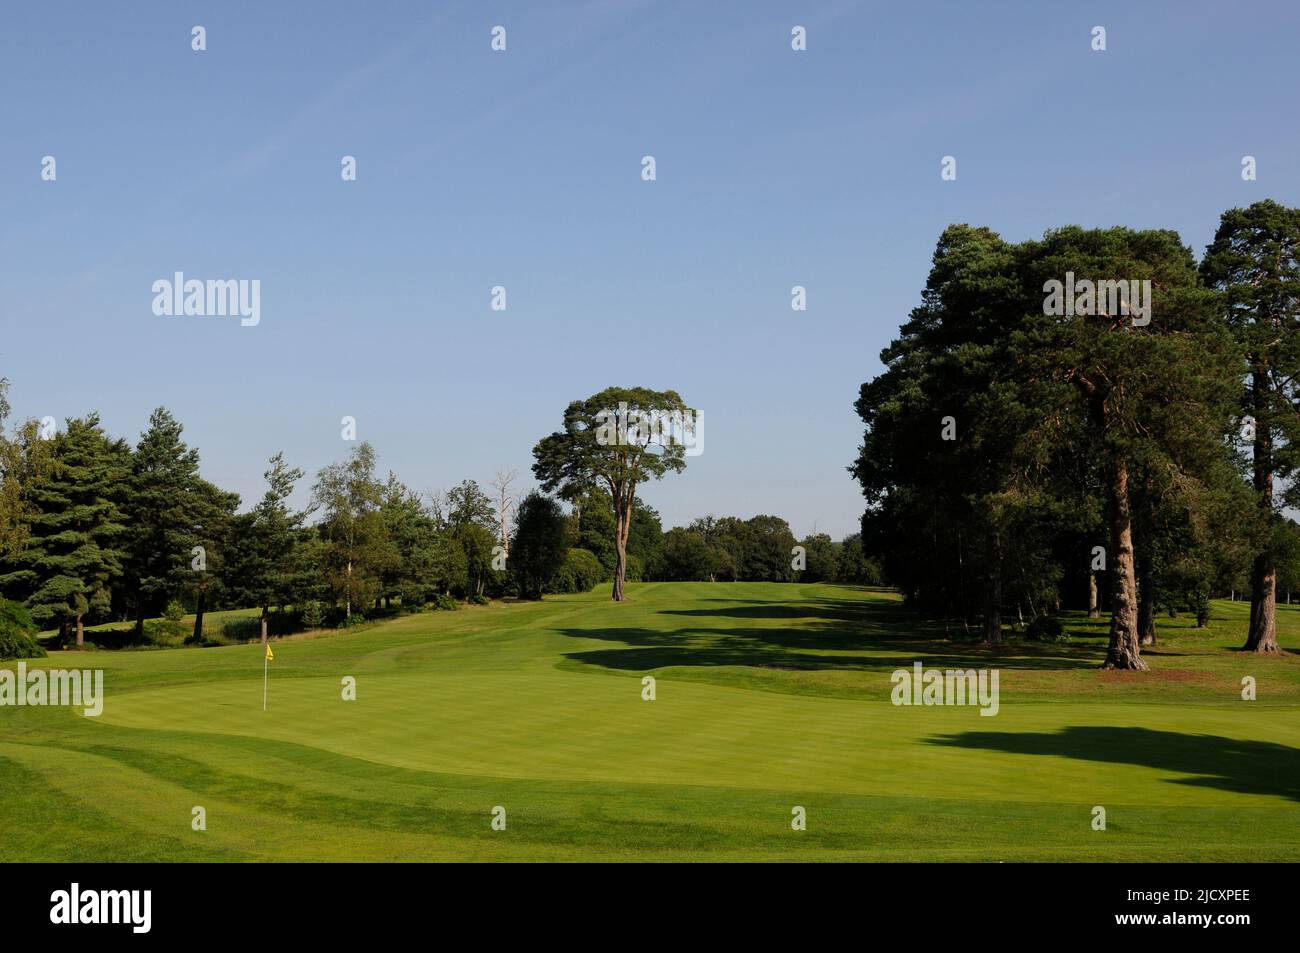 View of the 18th Green and fairway on the Longcross Course, Foxhills Country Club, Ottershaw, Surrey, England Stock Photo